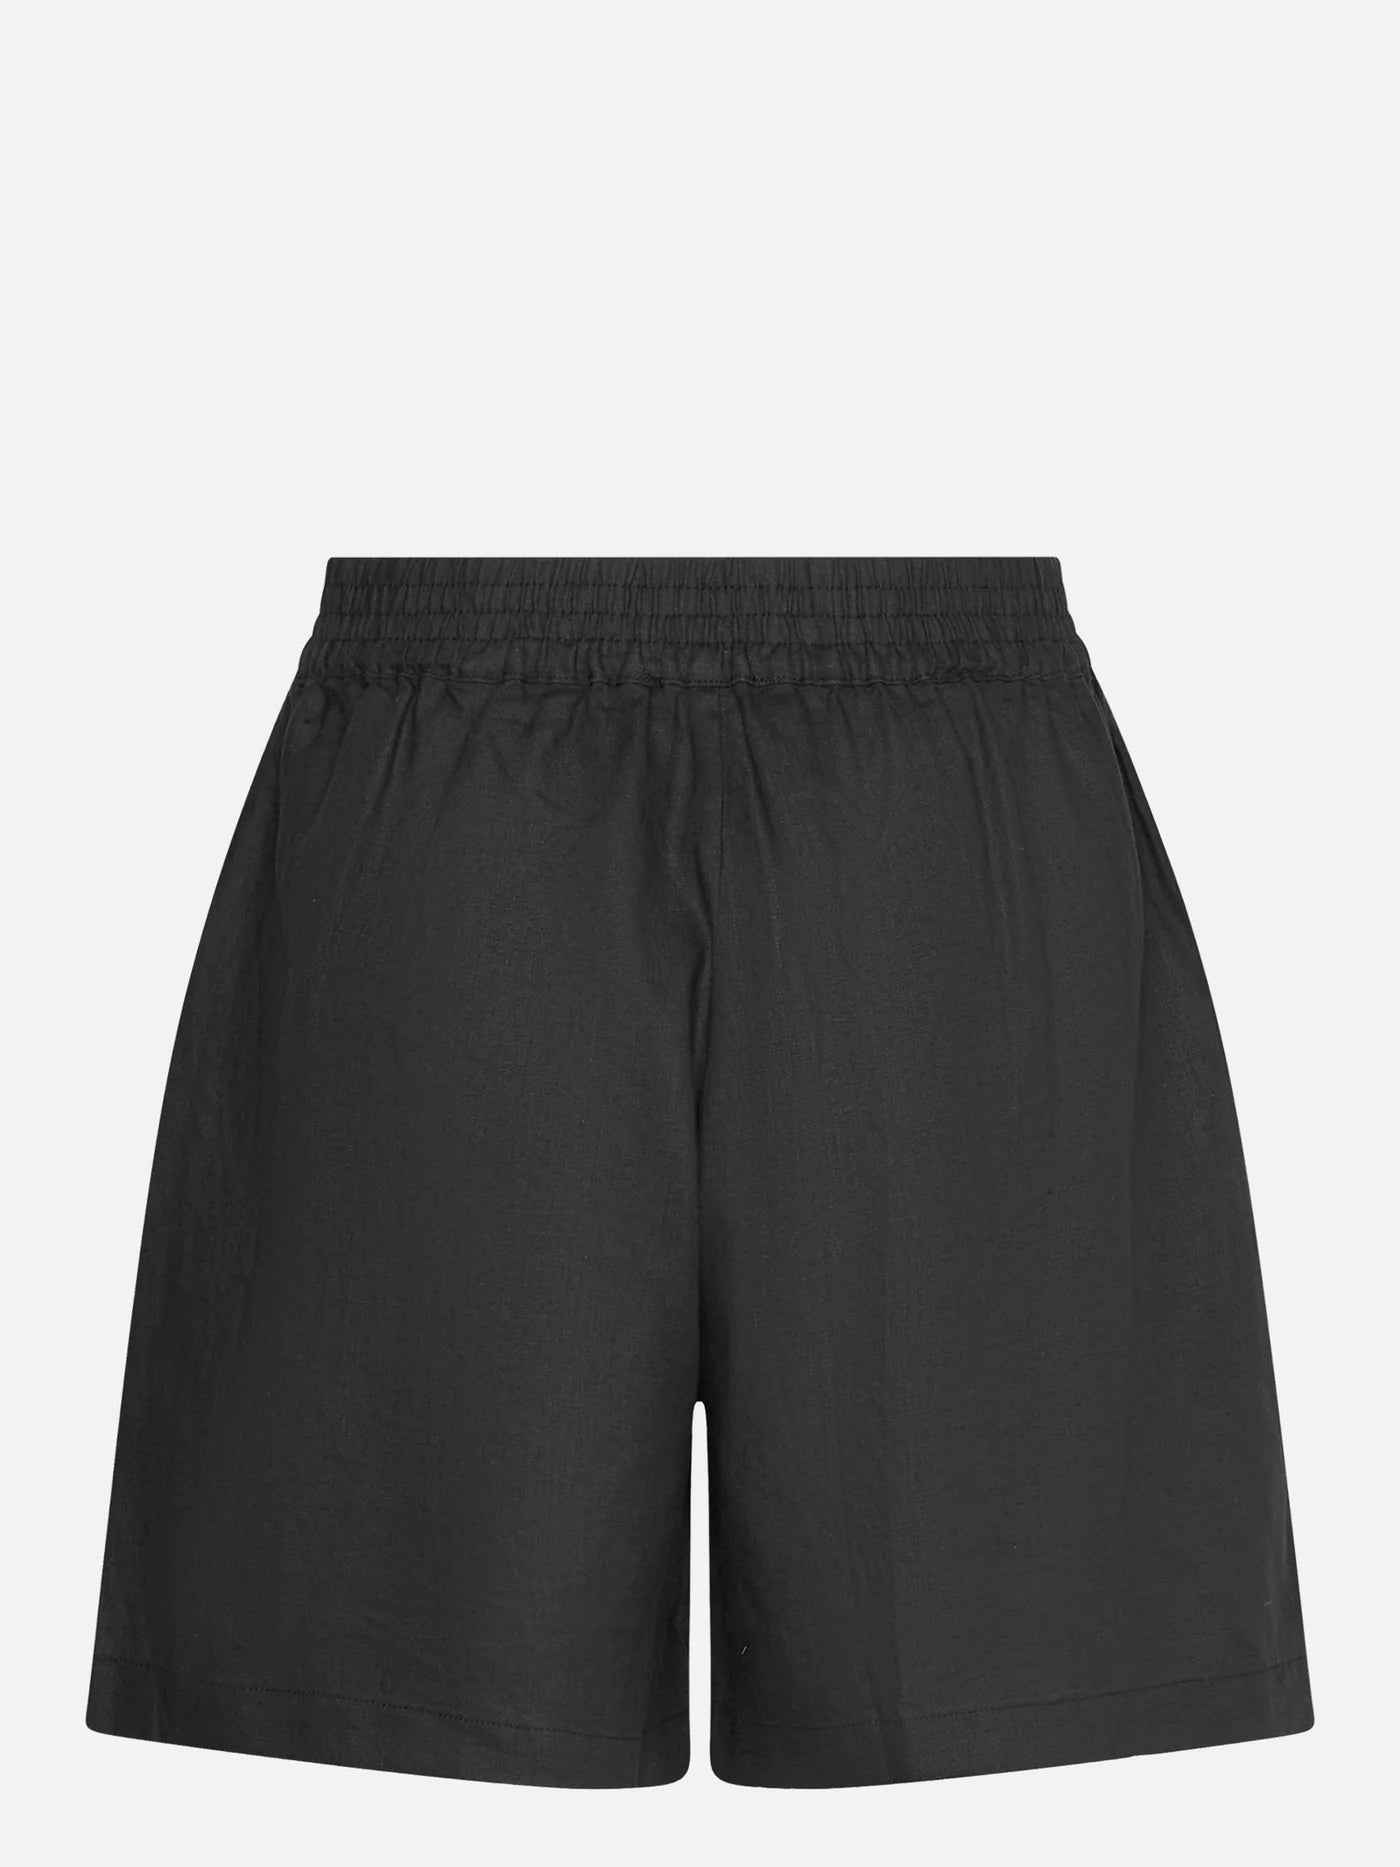 Rosemunde Black Linen Shorts with an elastic waistband, displayed against a plain background.